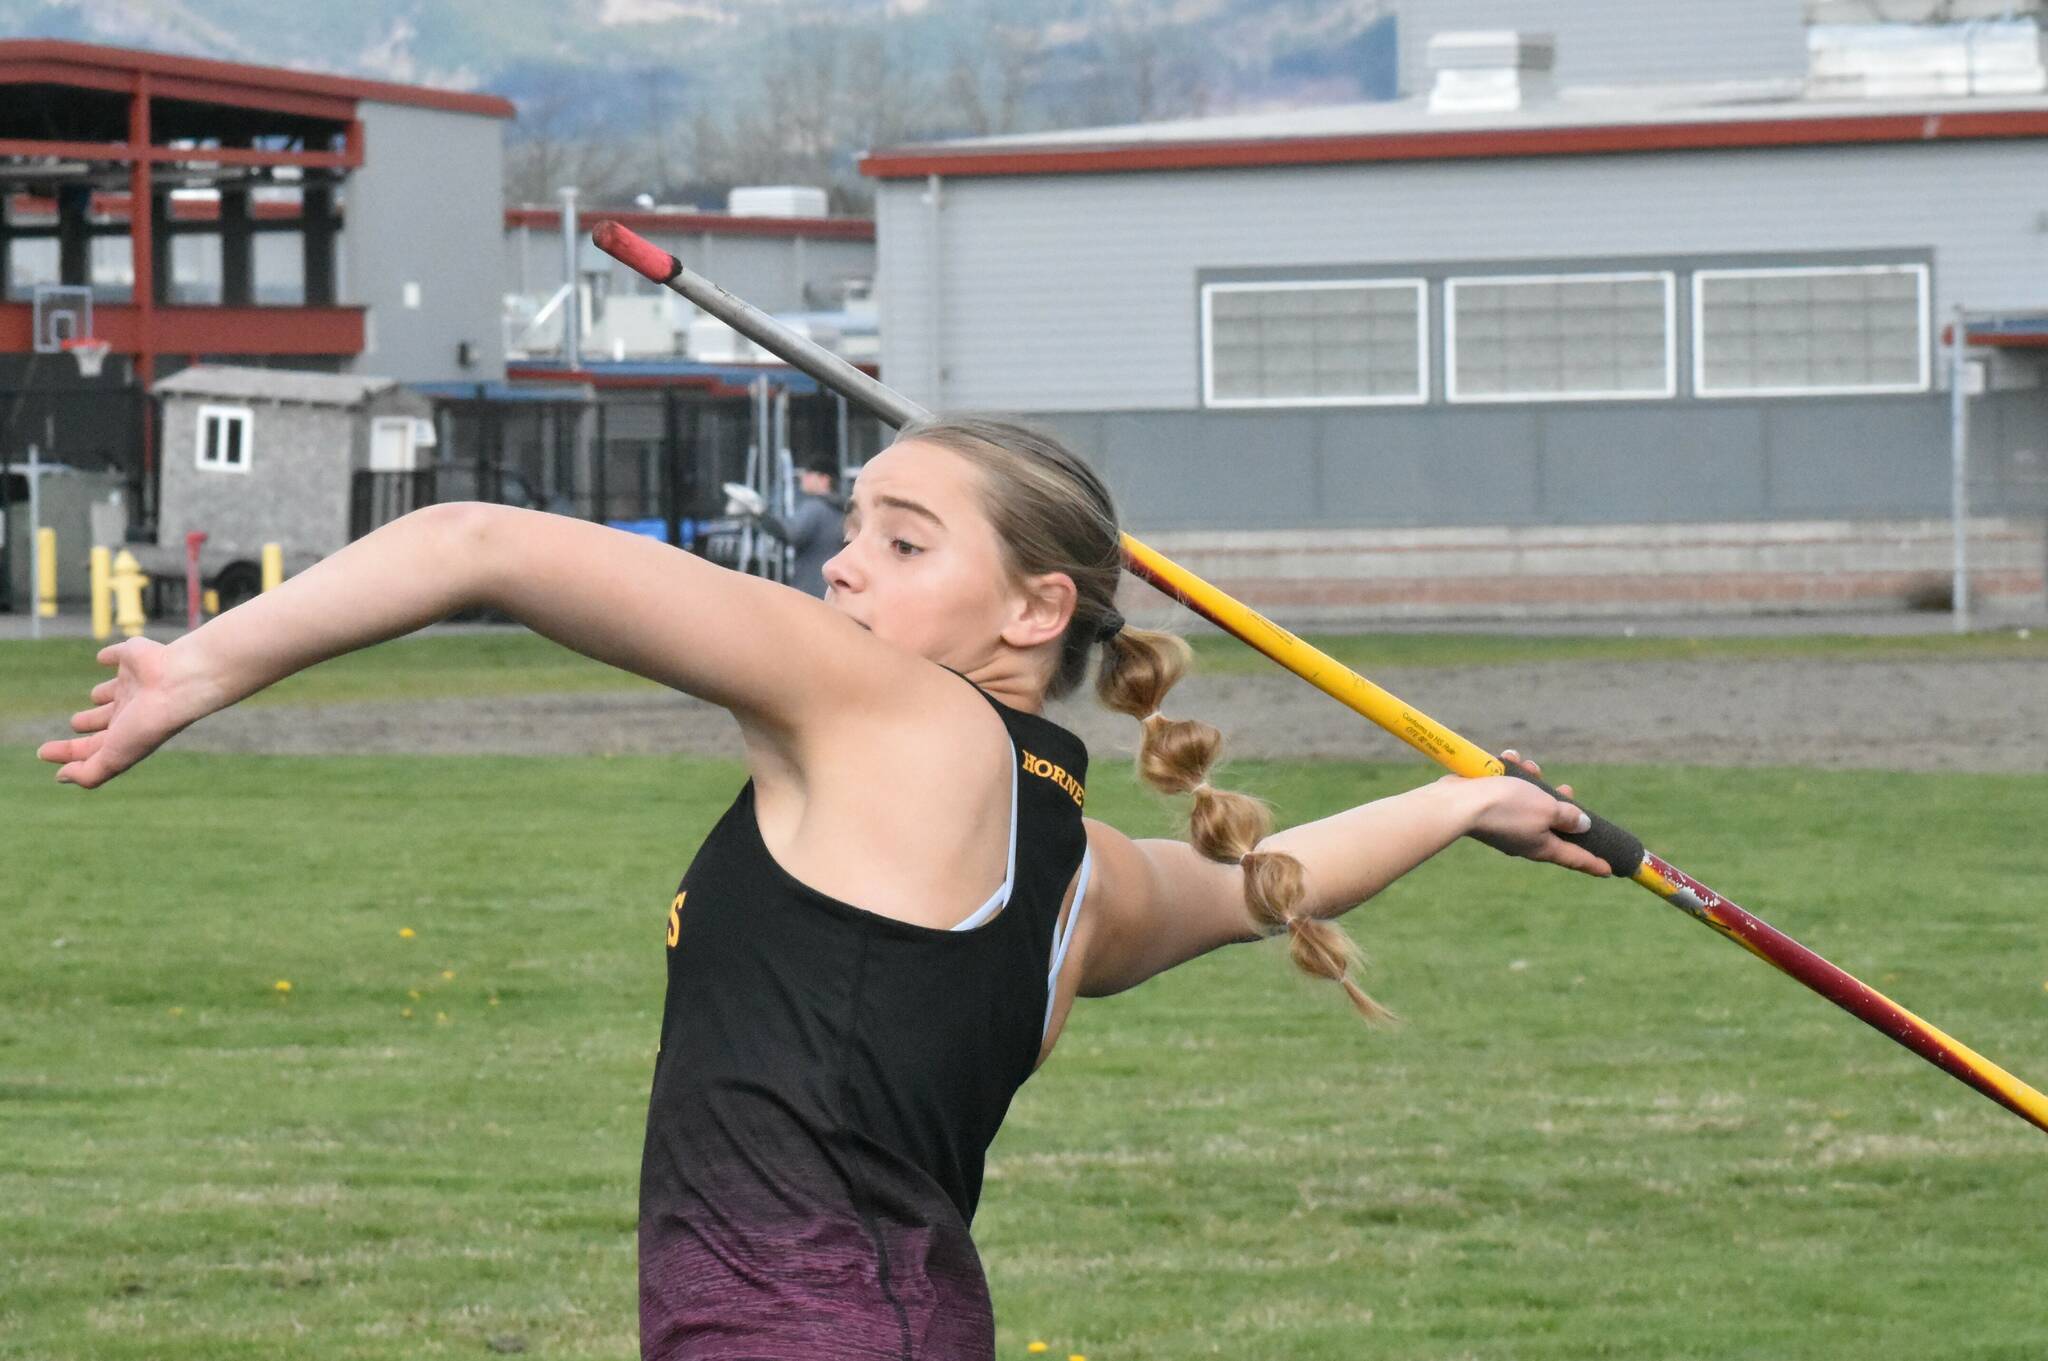 Enumclaw High hosted the Steilacoom Sentinels Thursday afternoon in SPSL 2A track and field action. Pictured here is Natalie DeMarco, who won the girls’ javelin competition with a personal-record throw of 107 feet. Photo by Kevin Hanson